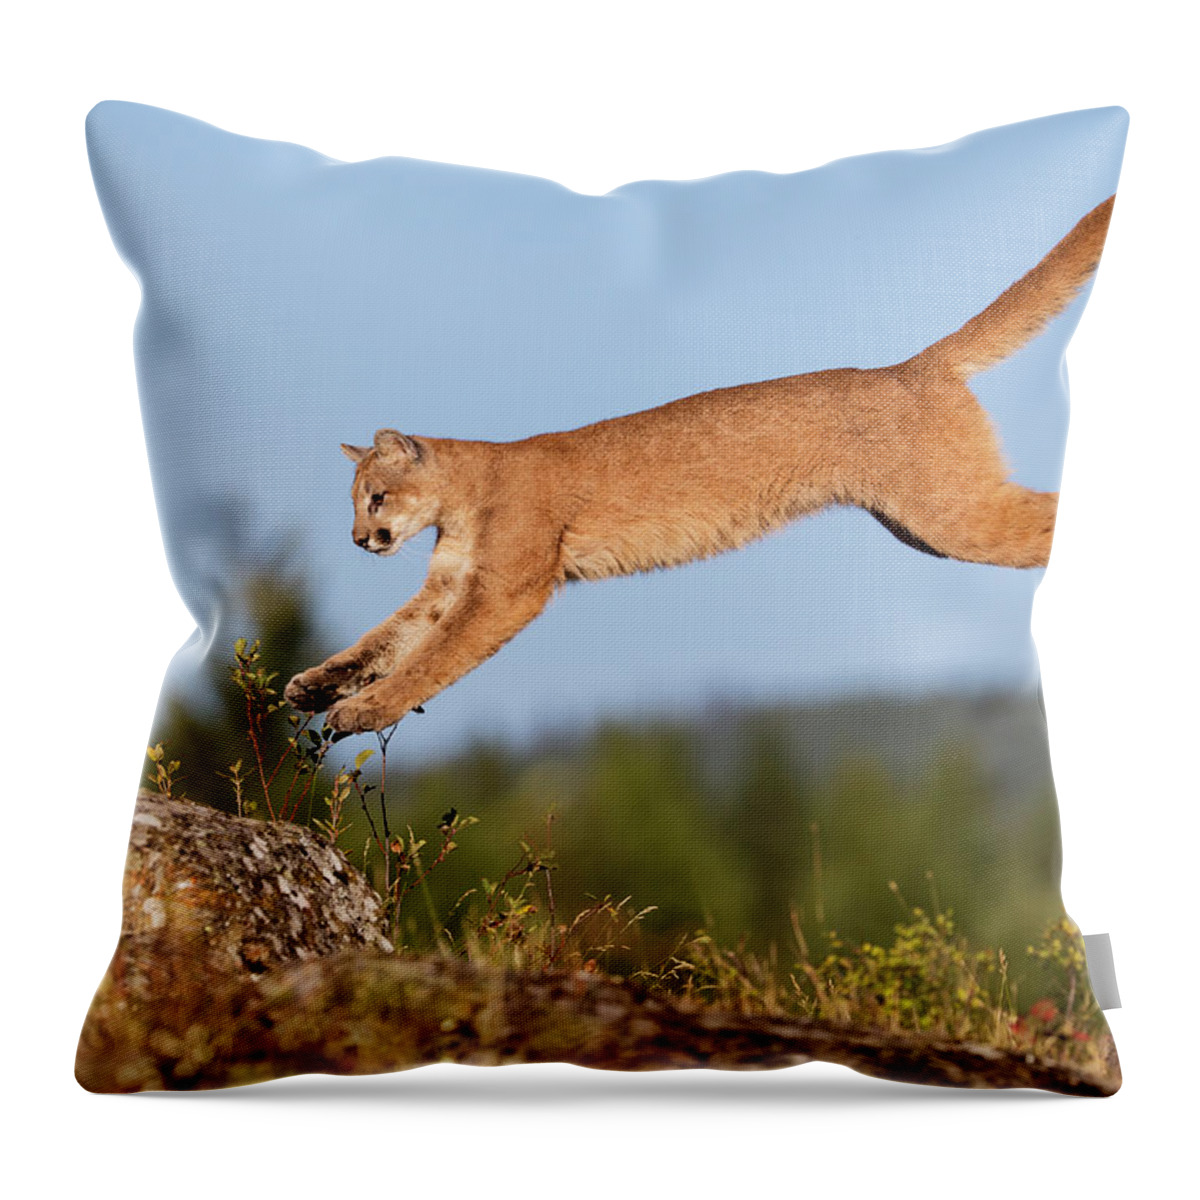 Animal Themes Throw Pillow featuring the photograph Mountain Loin by Gary Samples